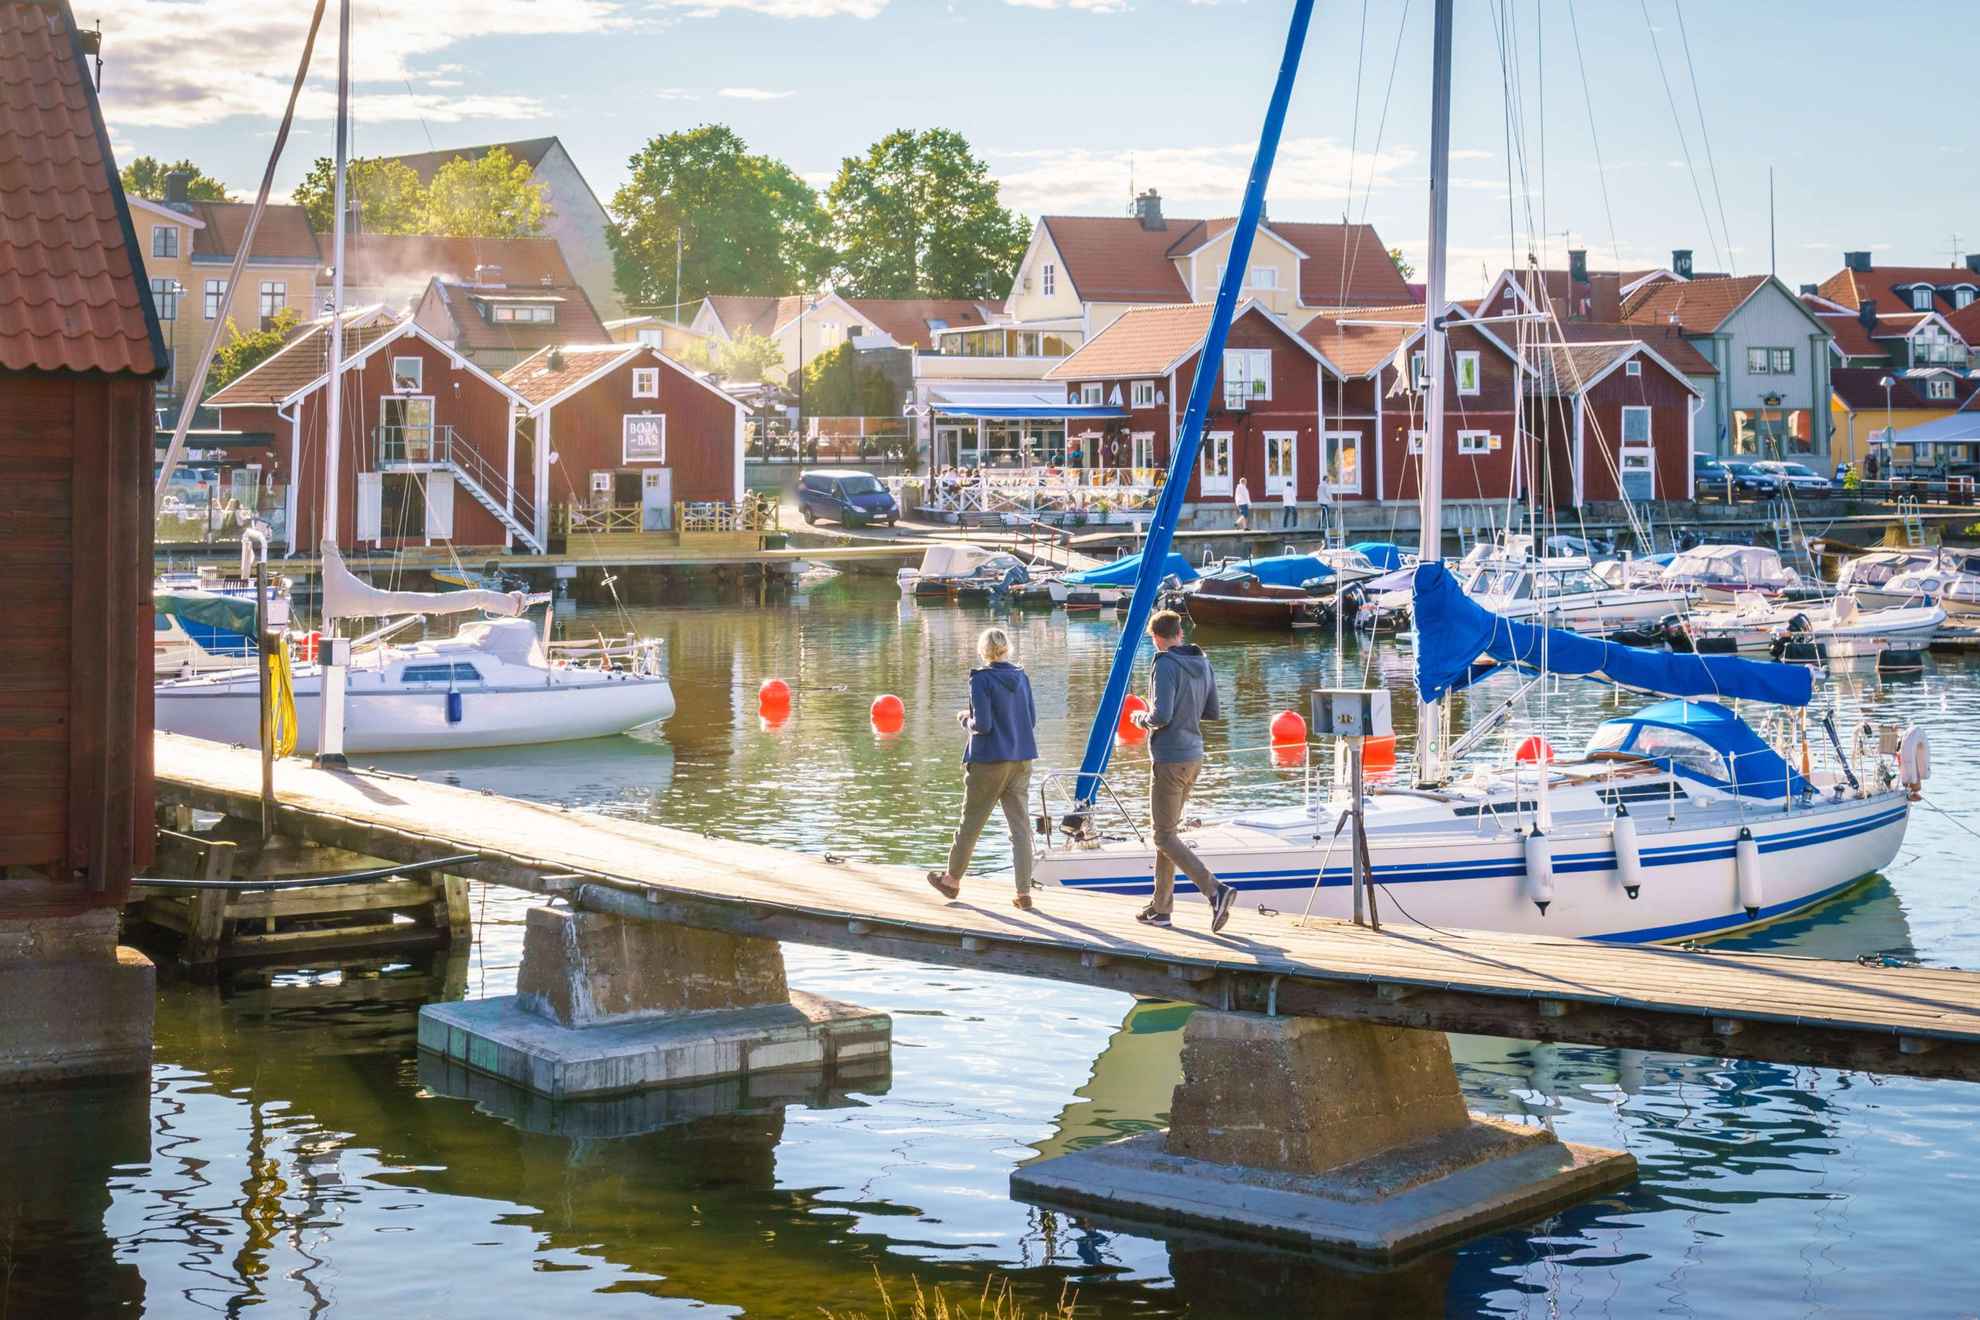 A couple walks on a jetty in a marina in a small wooden city. There are red cottages along the waterside.